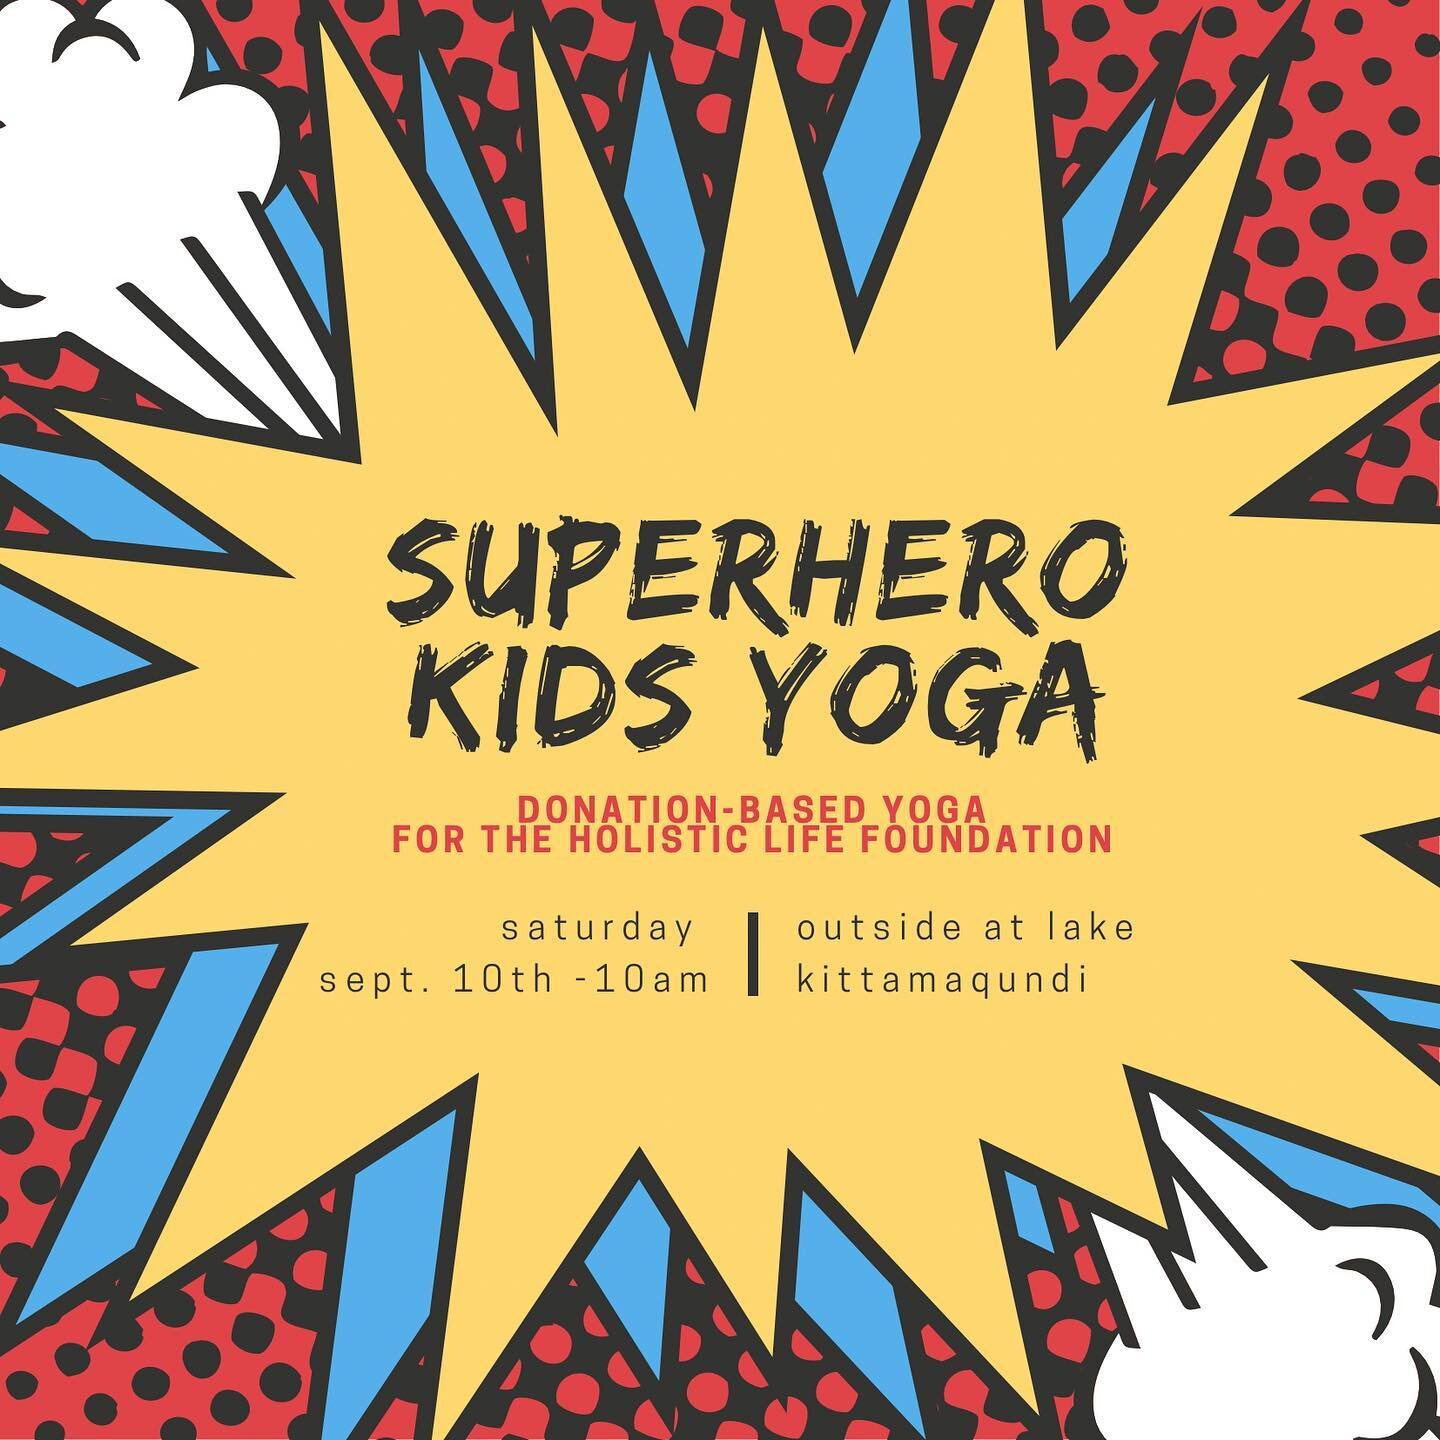 Join me Saturday, September 10th at 10am for a donation-based kids yoga class outside Lake Kittamaqundi in Columbia @thepearlspa 😊

In this 40 minute kids yoga class (ideal for ages 3-9) we will connect to our breath and our bodies through movement,